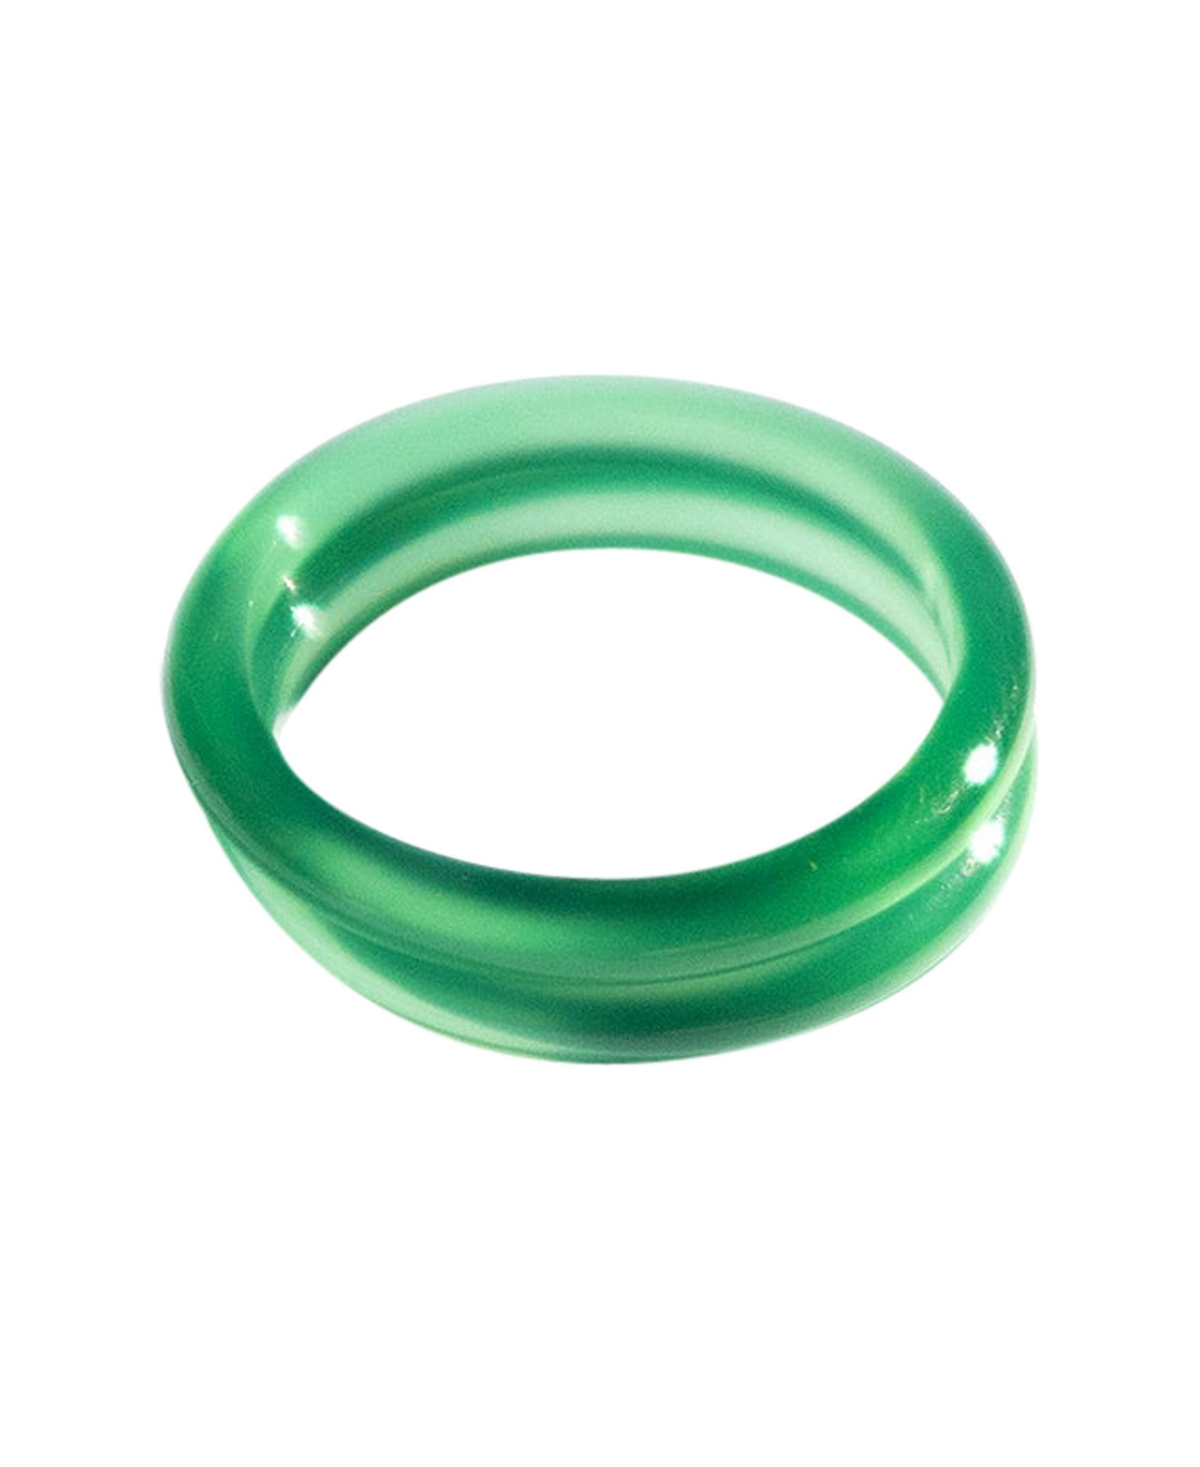 Forest - Green jade stone skinny stacking rings - Green